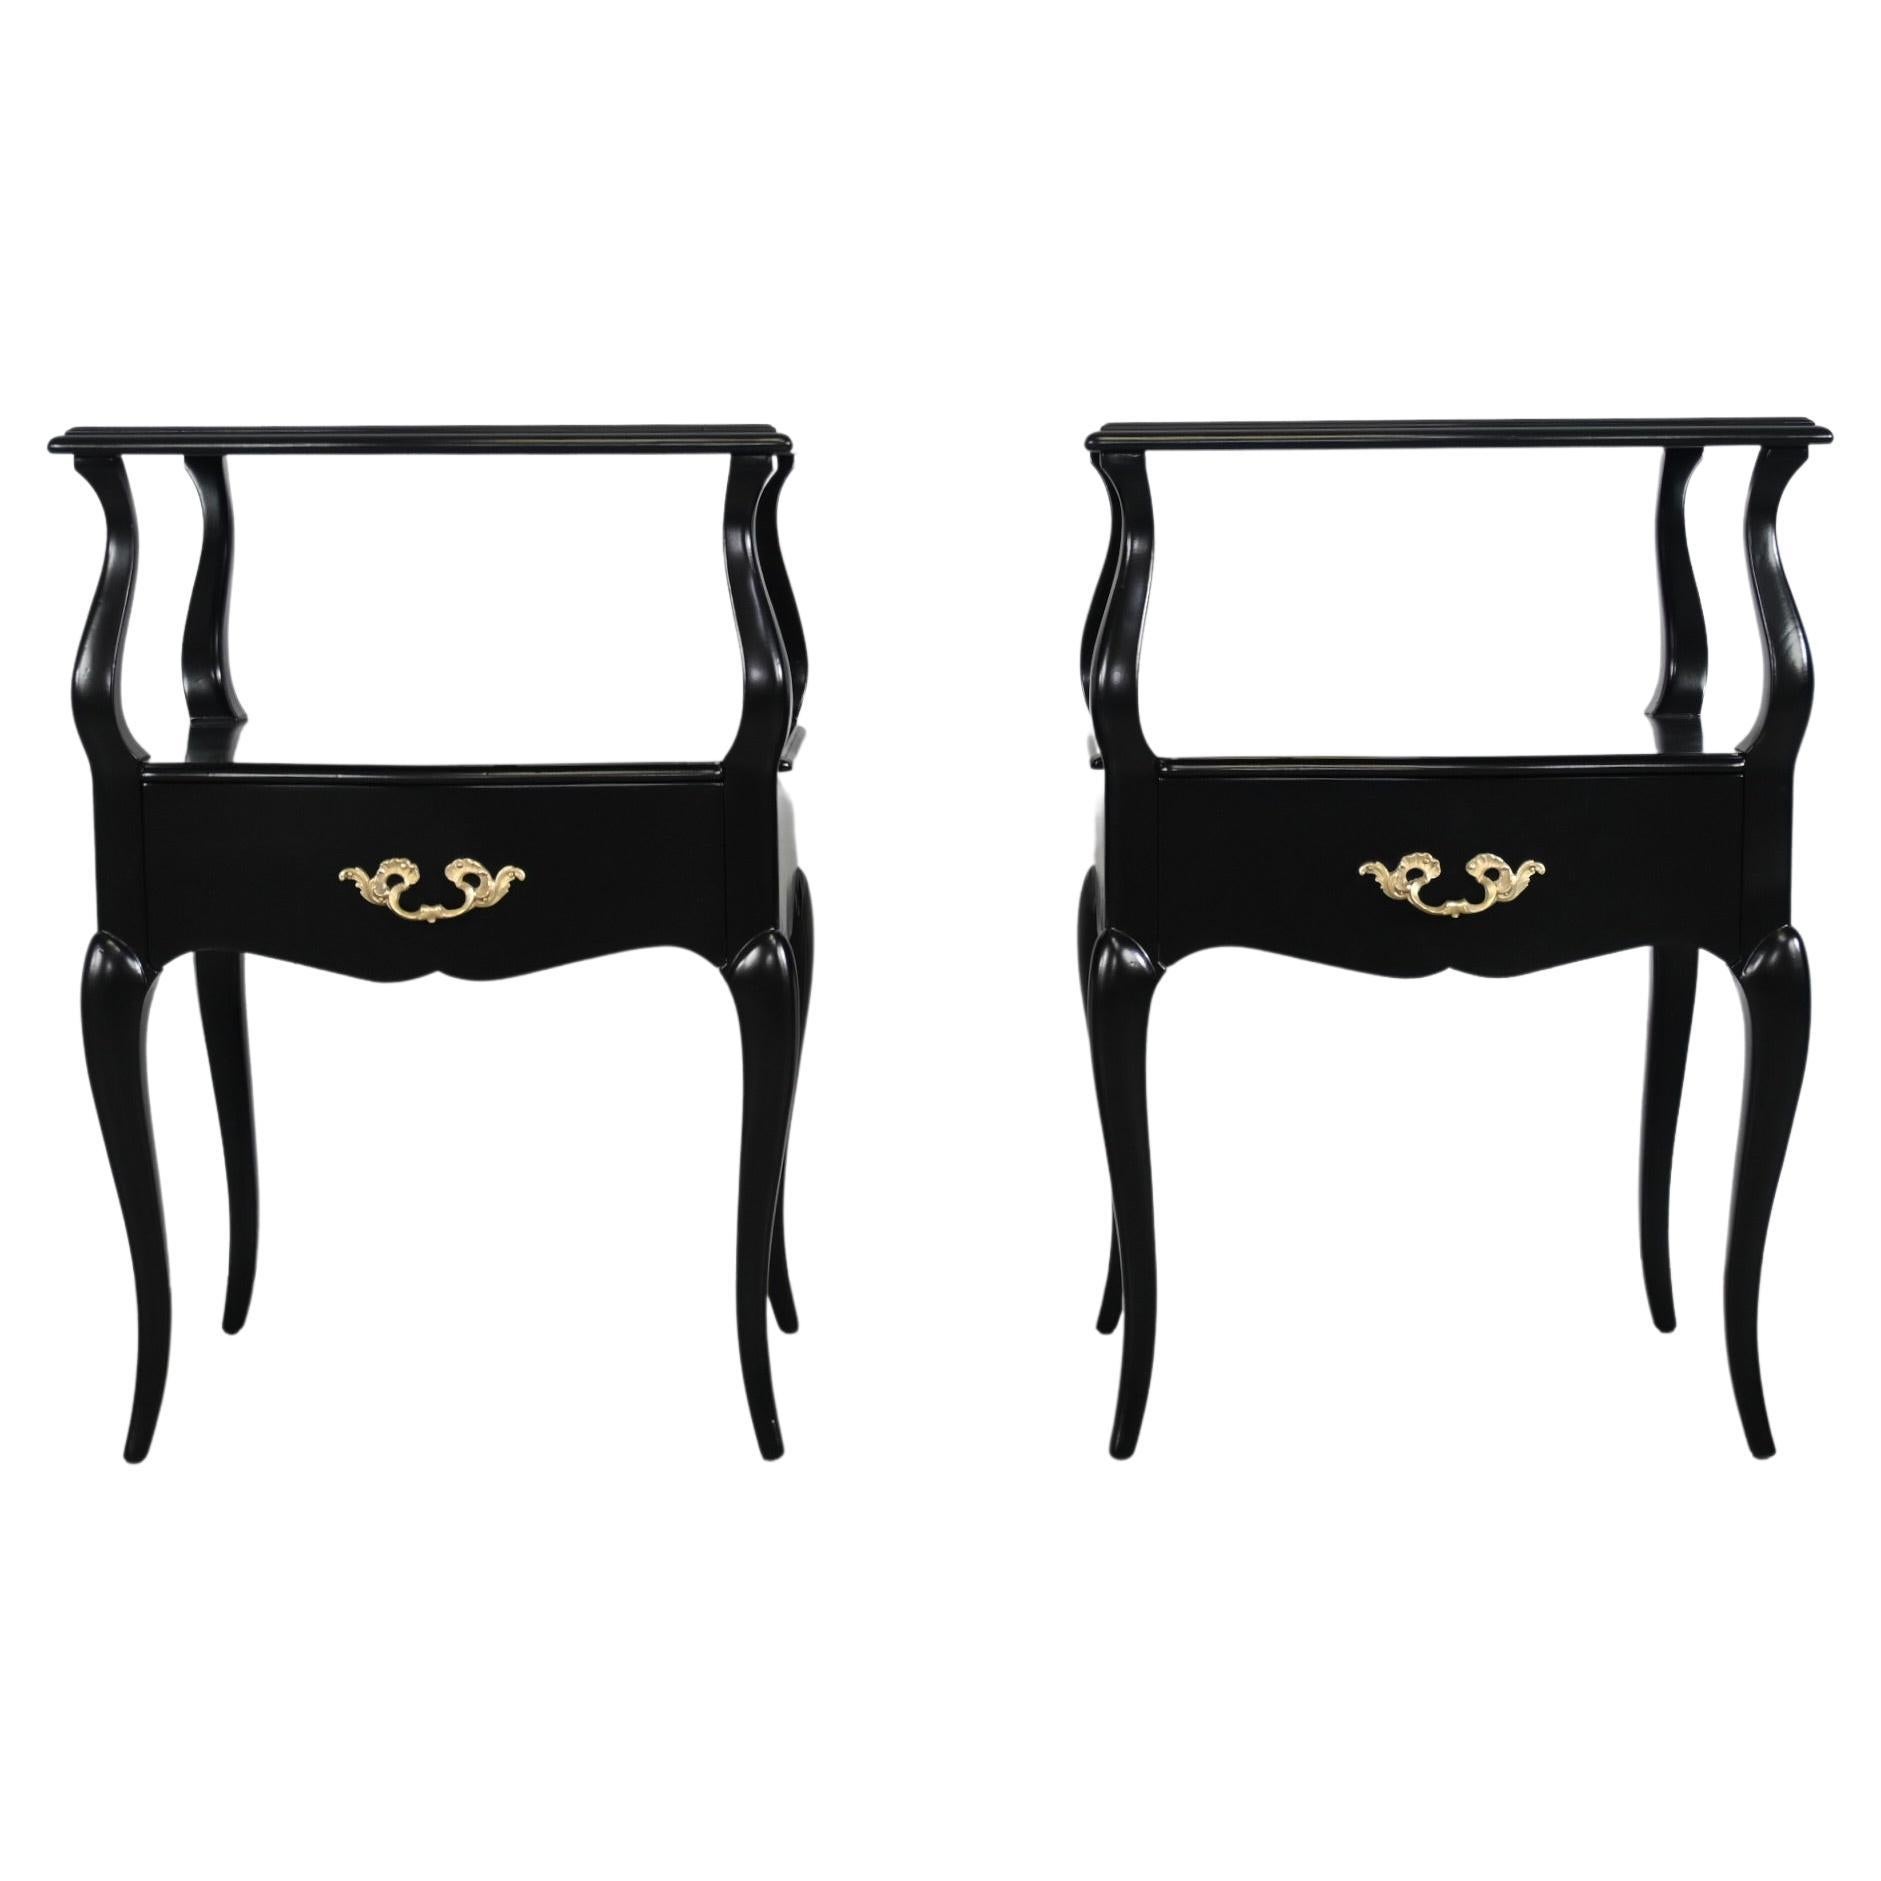 French Provincial Style Black Lacquered Nightstands, Pair Description